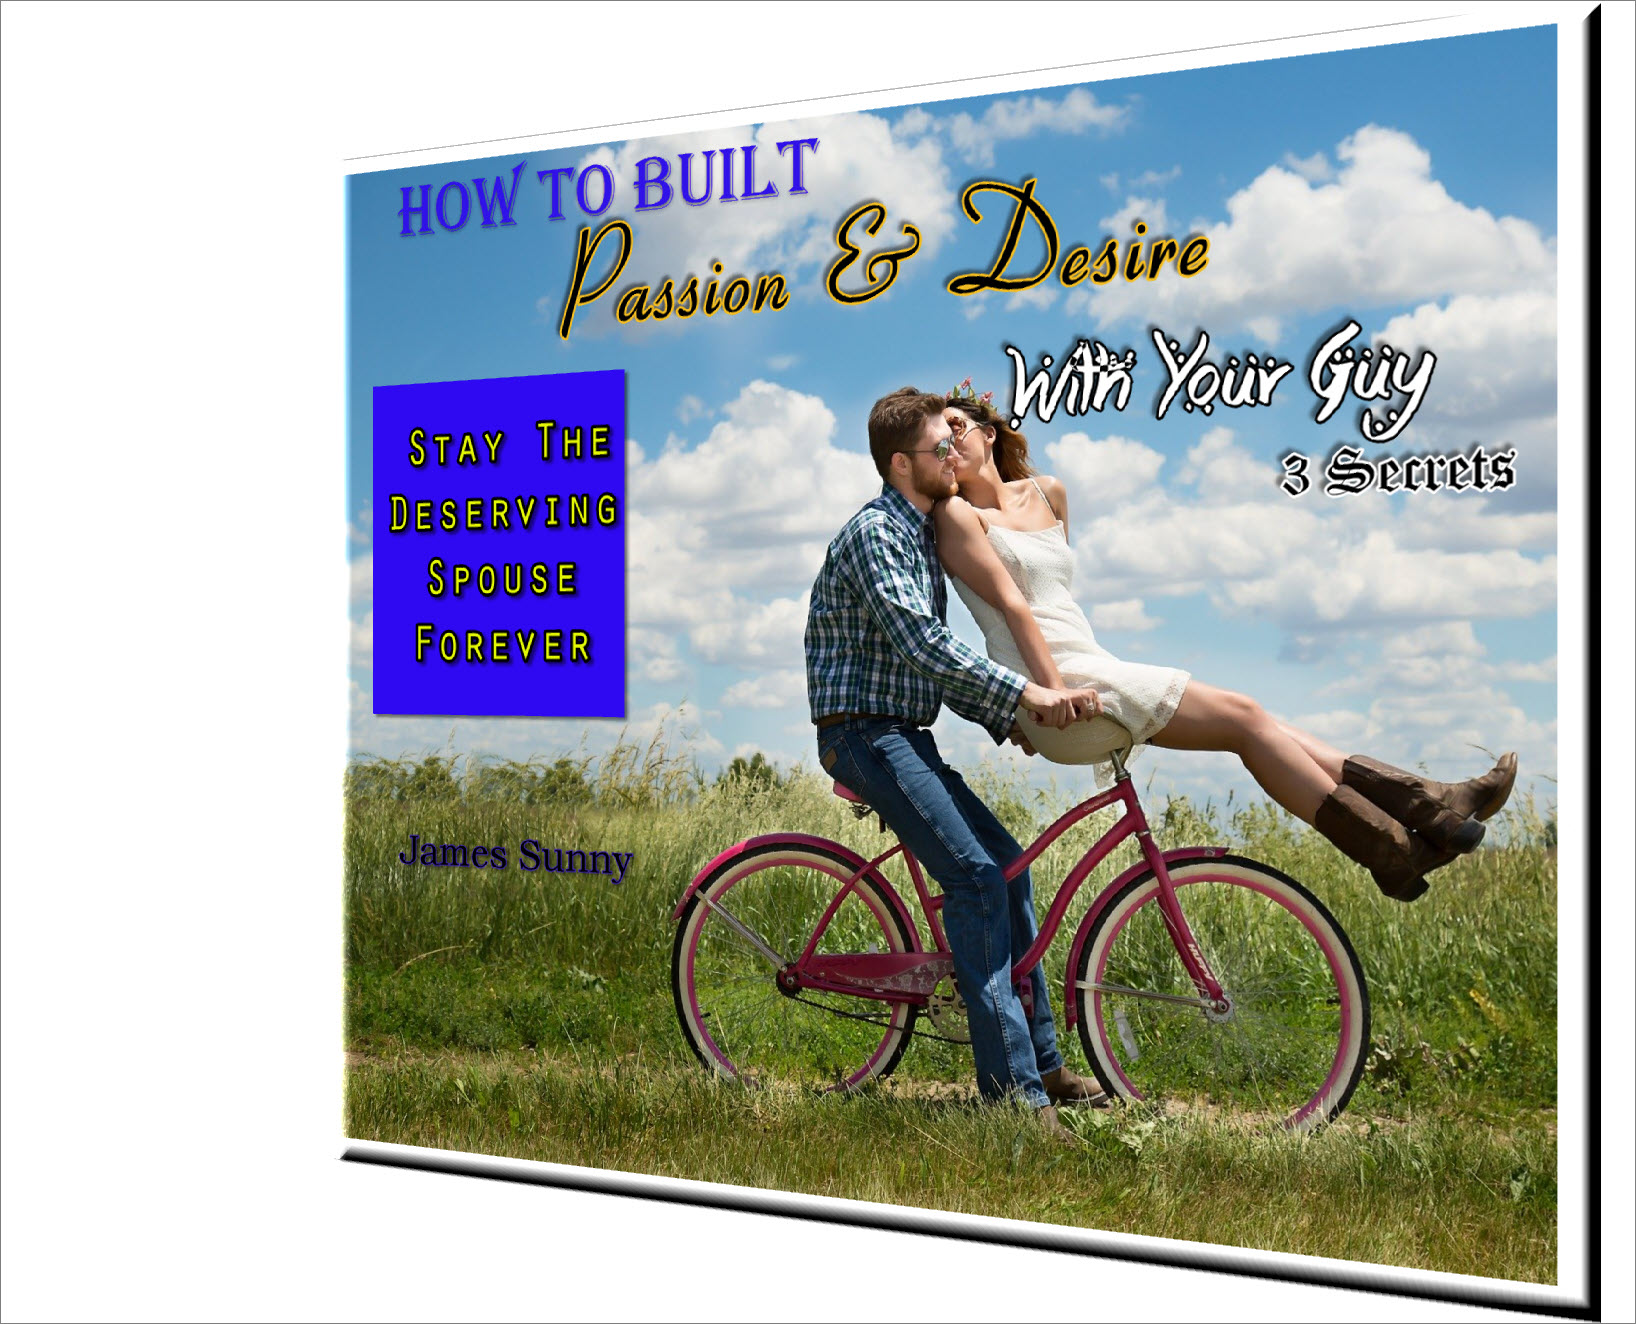 FREE: How To Built Passion & Desire With Your Guy: 3 Secrets by James Sunny